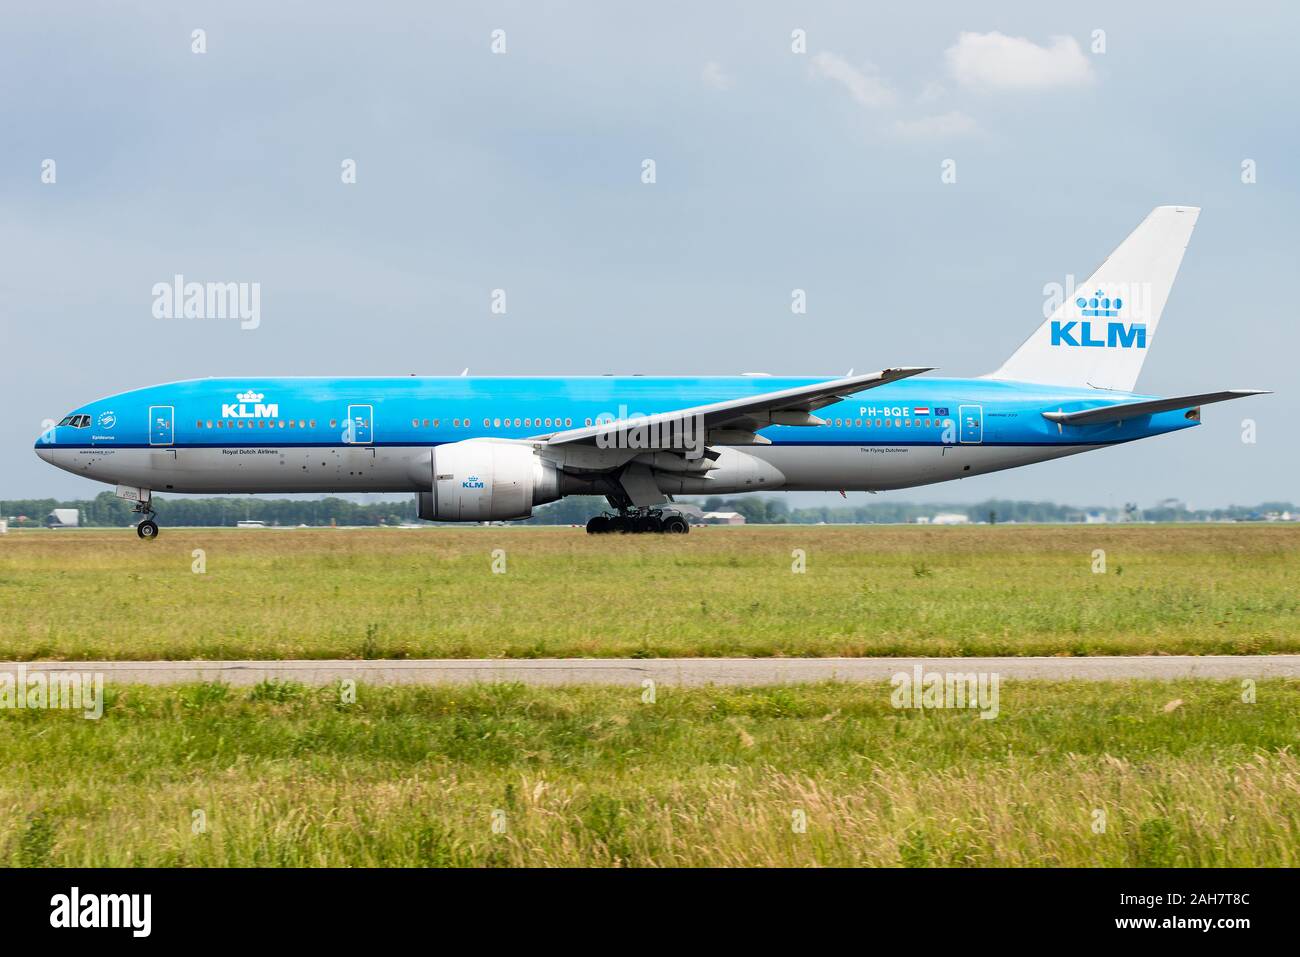 A Boeing 777 passenger aircraft of KLM Royal Dutch Airlines at the Amsterdam Airport Schiphol. Stock Photo